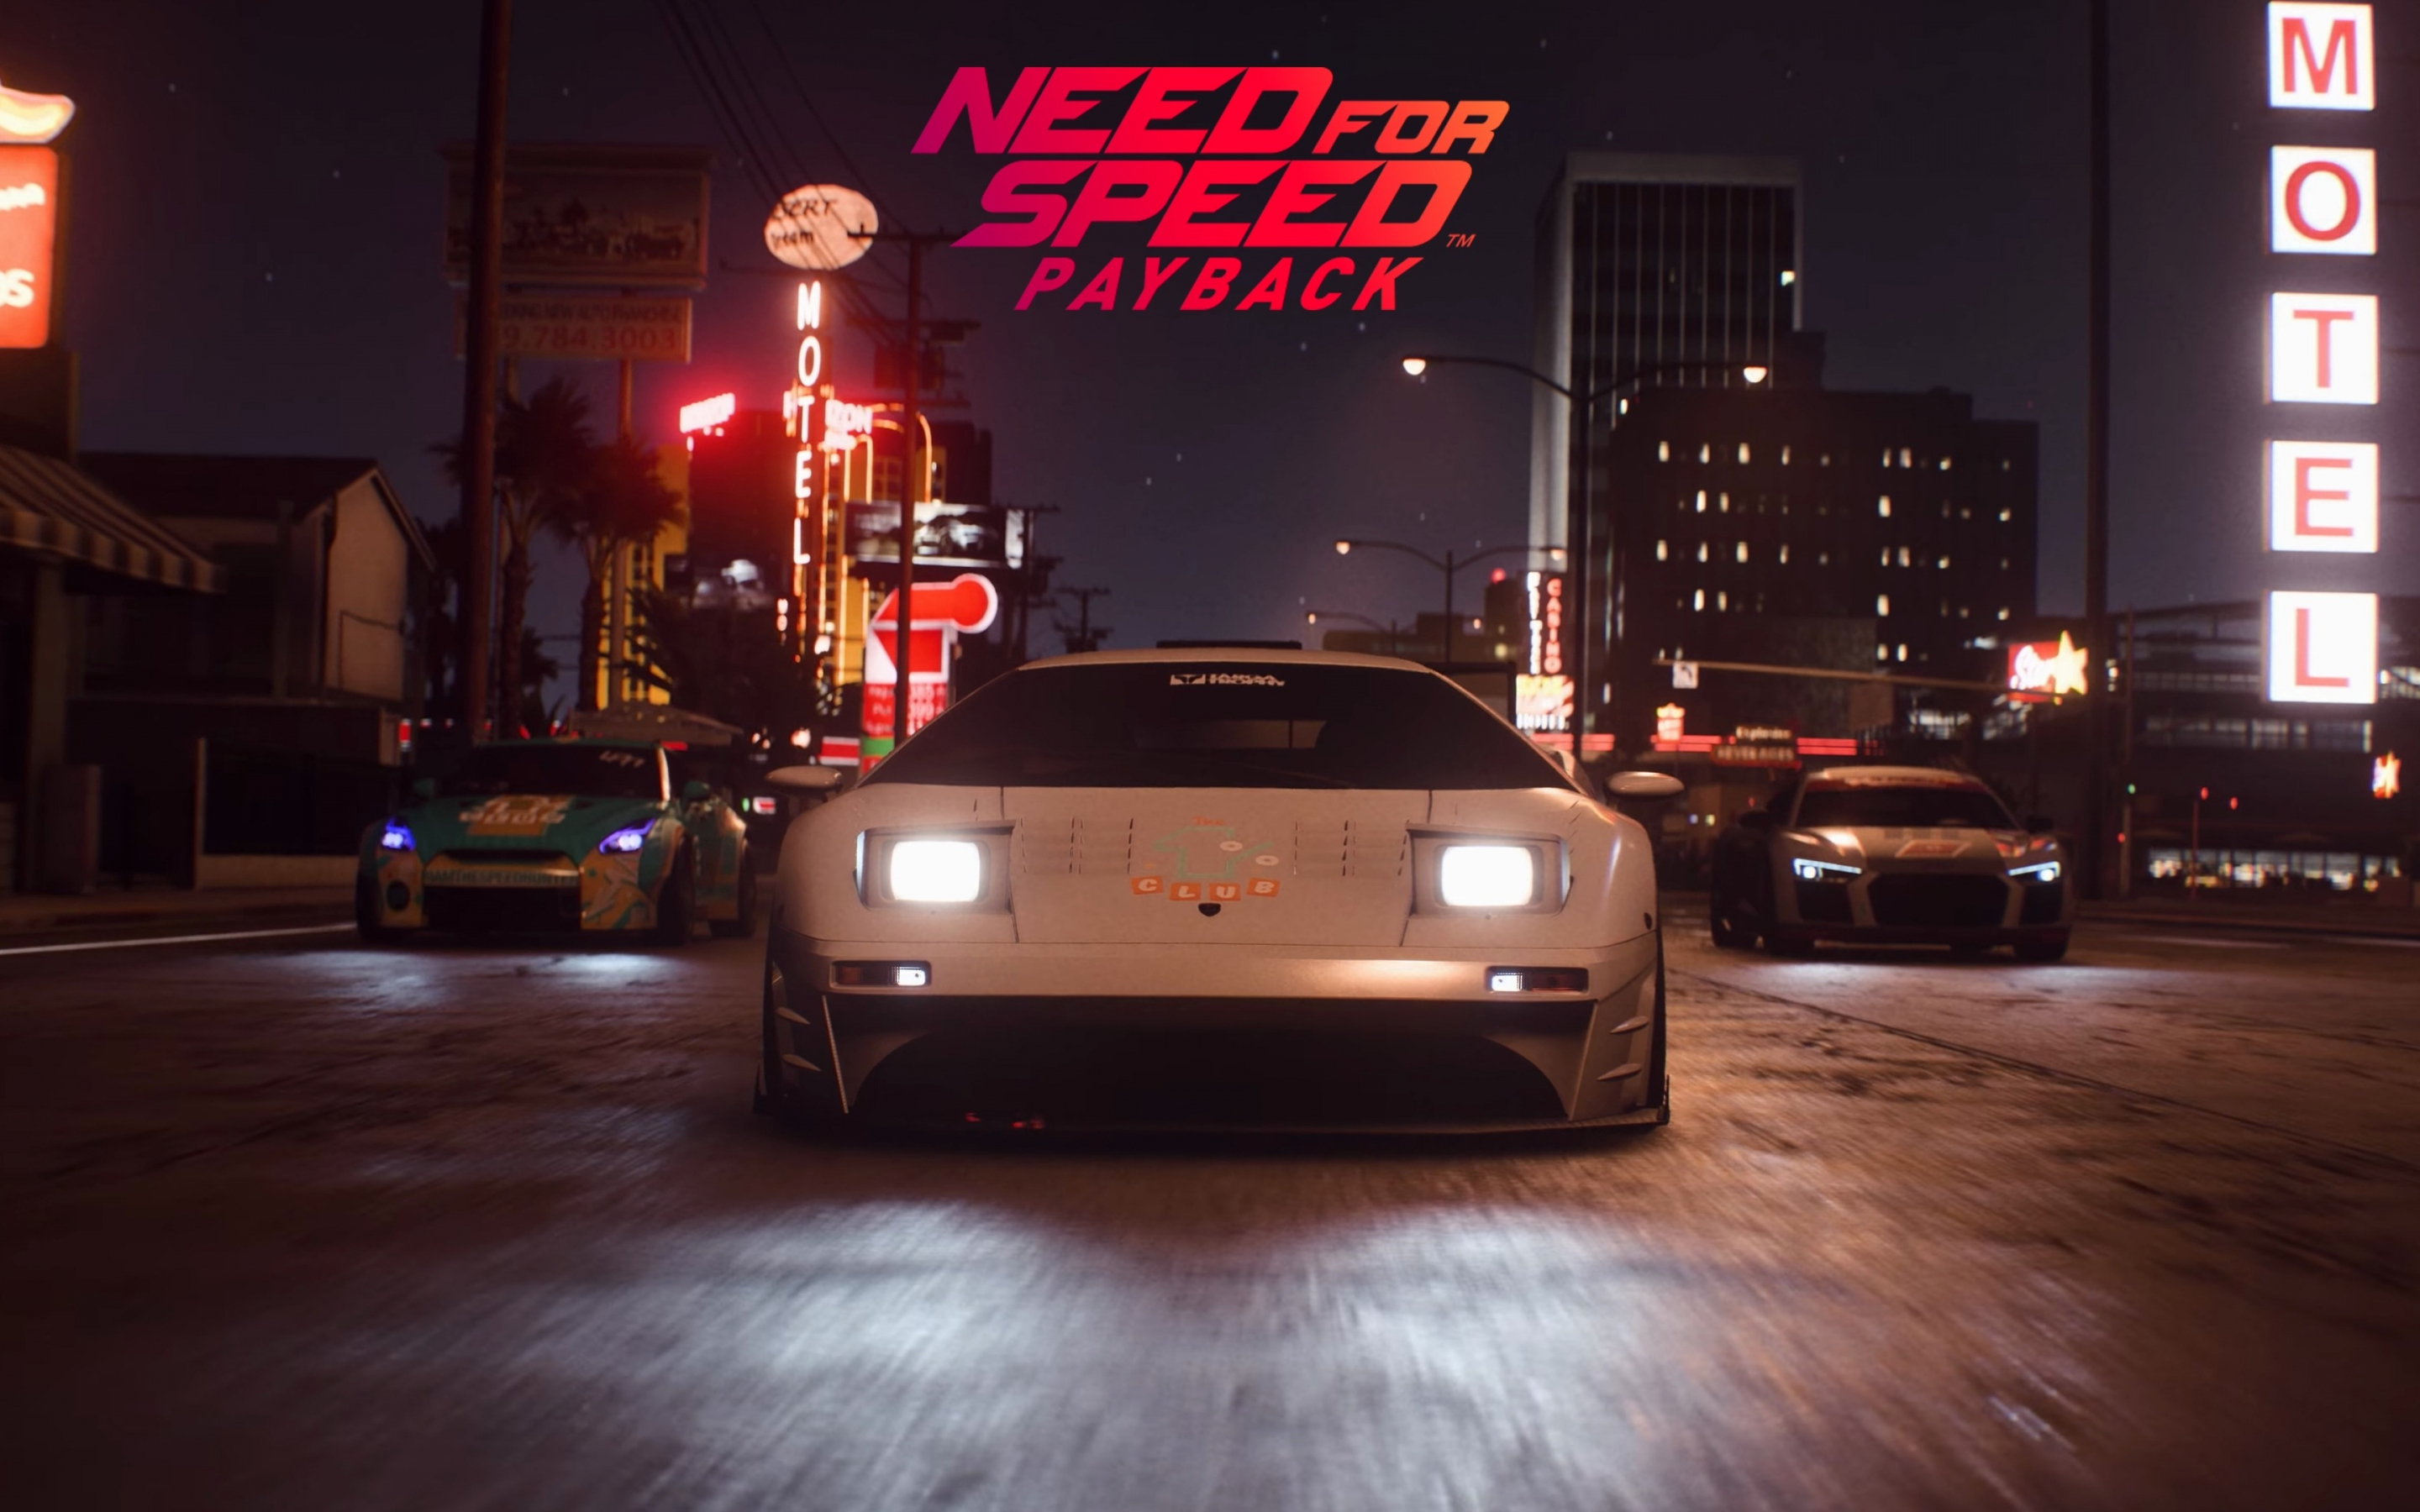 Need for speed payback, video game, Lamborghini, cars, 2880x1800 wallpaper